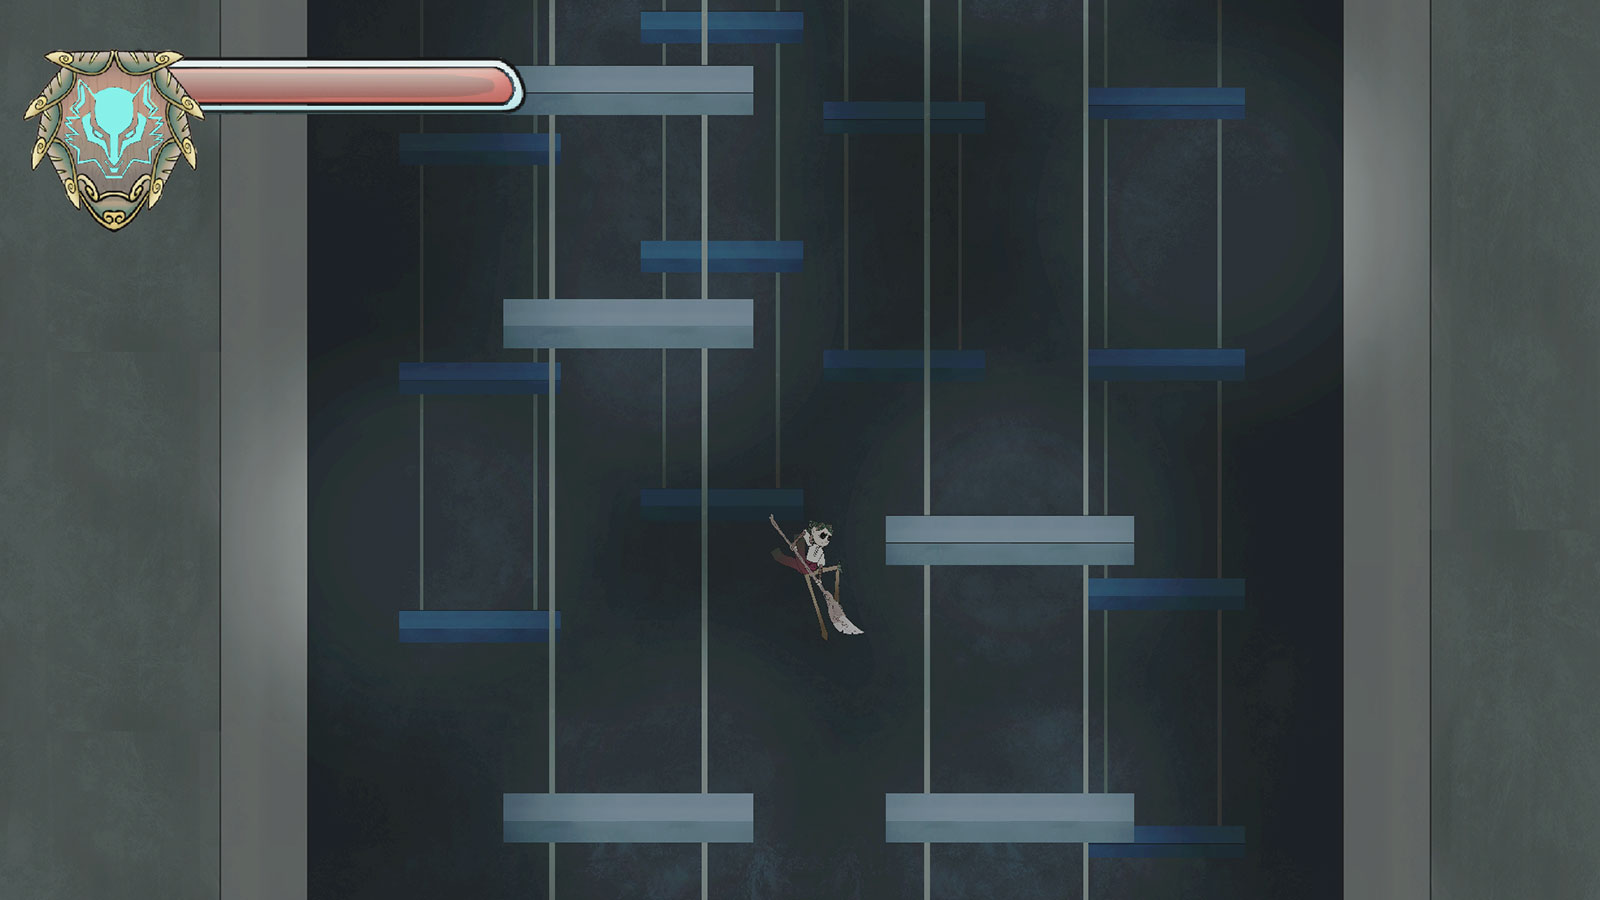 Player jumps down a shaft between square platforms